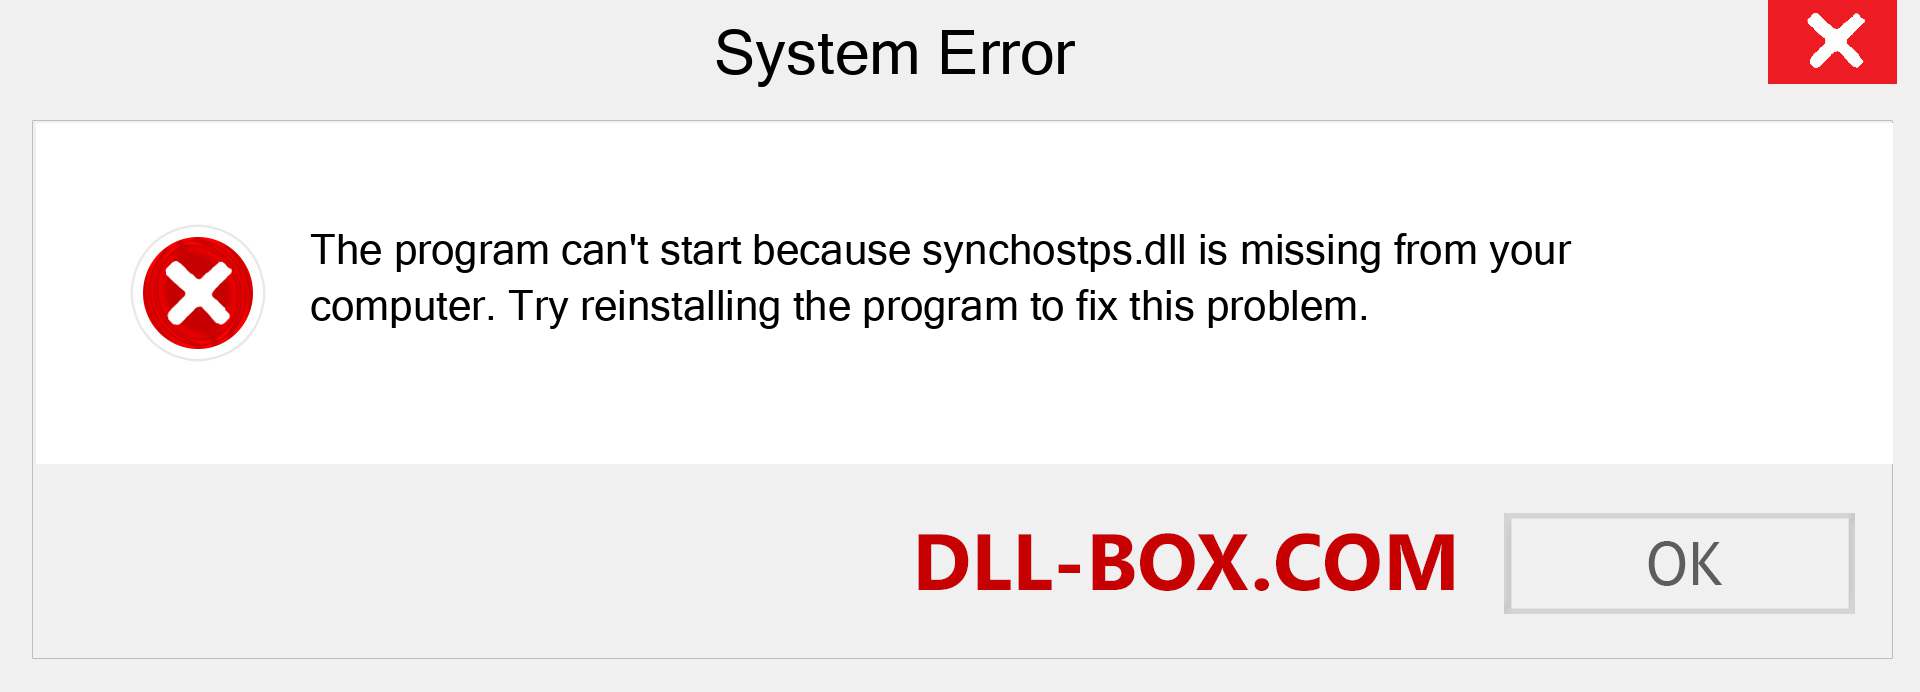  synchostps.dll file is missing?. Download for Windows 7, 8, 10 - Fix  synchostps dll Missing Error on Windows, photos, images